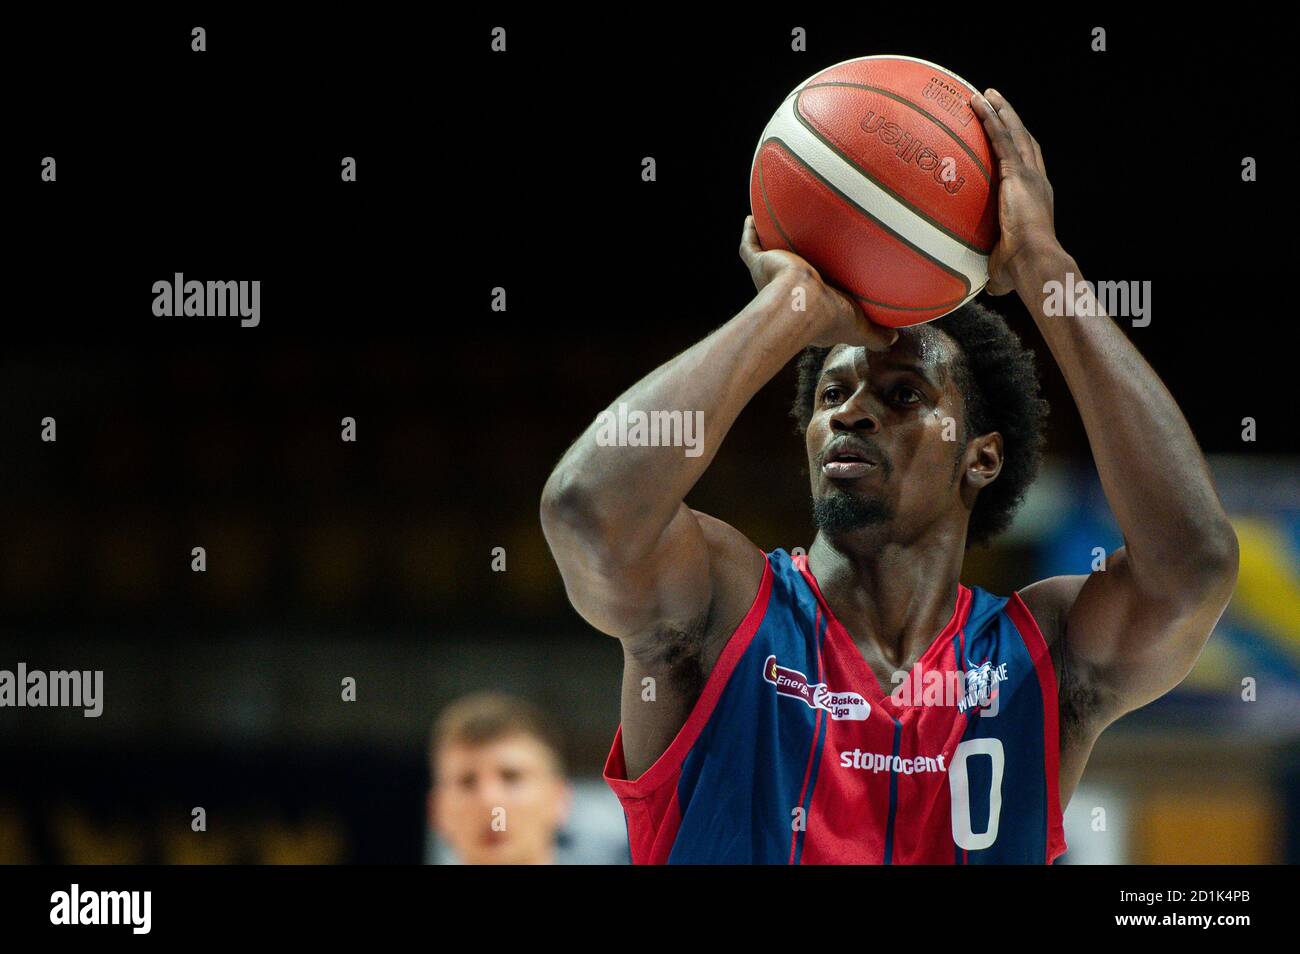 Gdynia, Poland. 05th Oct, 2020. Thomas Davis of King seen in action during  the Energa Basket League match between Asseco Arka Gdynia and King  Szczecin.(Final score; Asseco Arka Gdynia 95:74 King Szczecin)